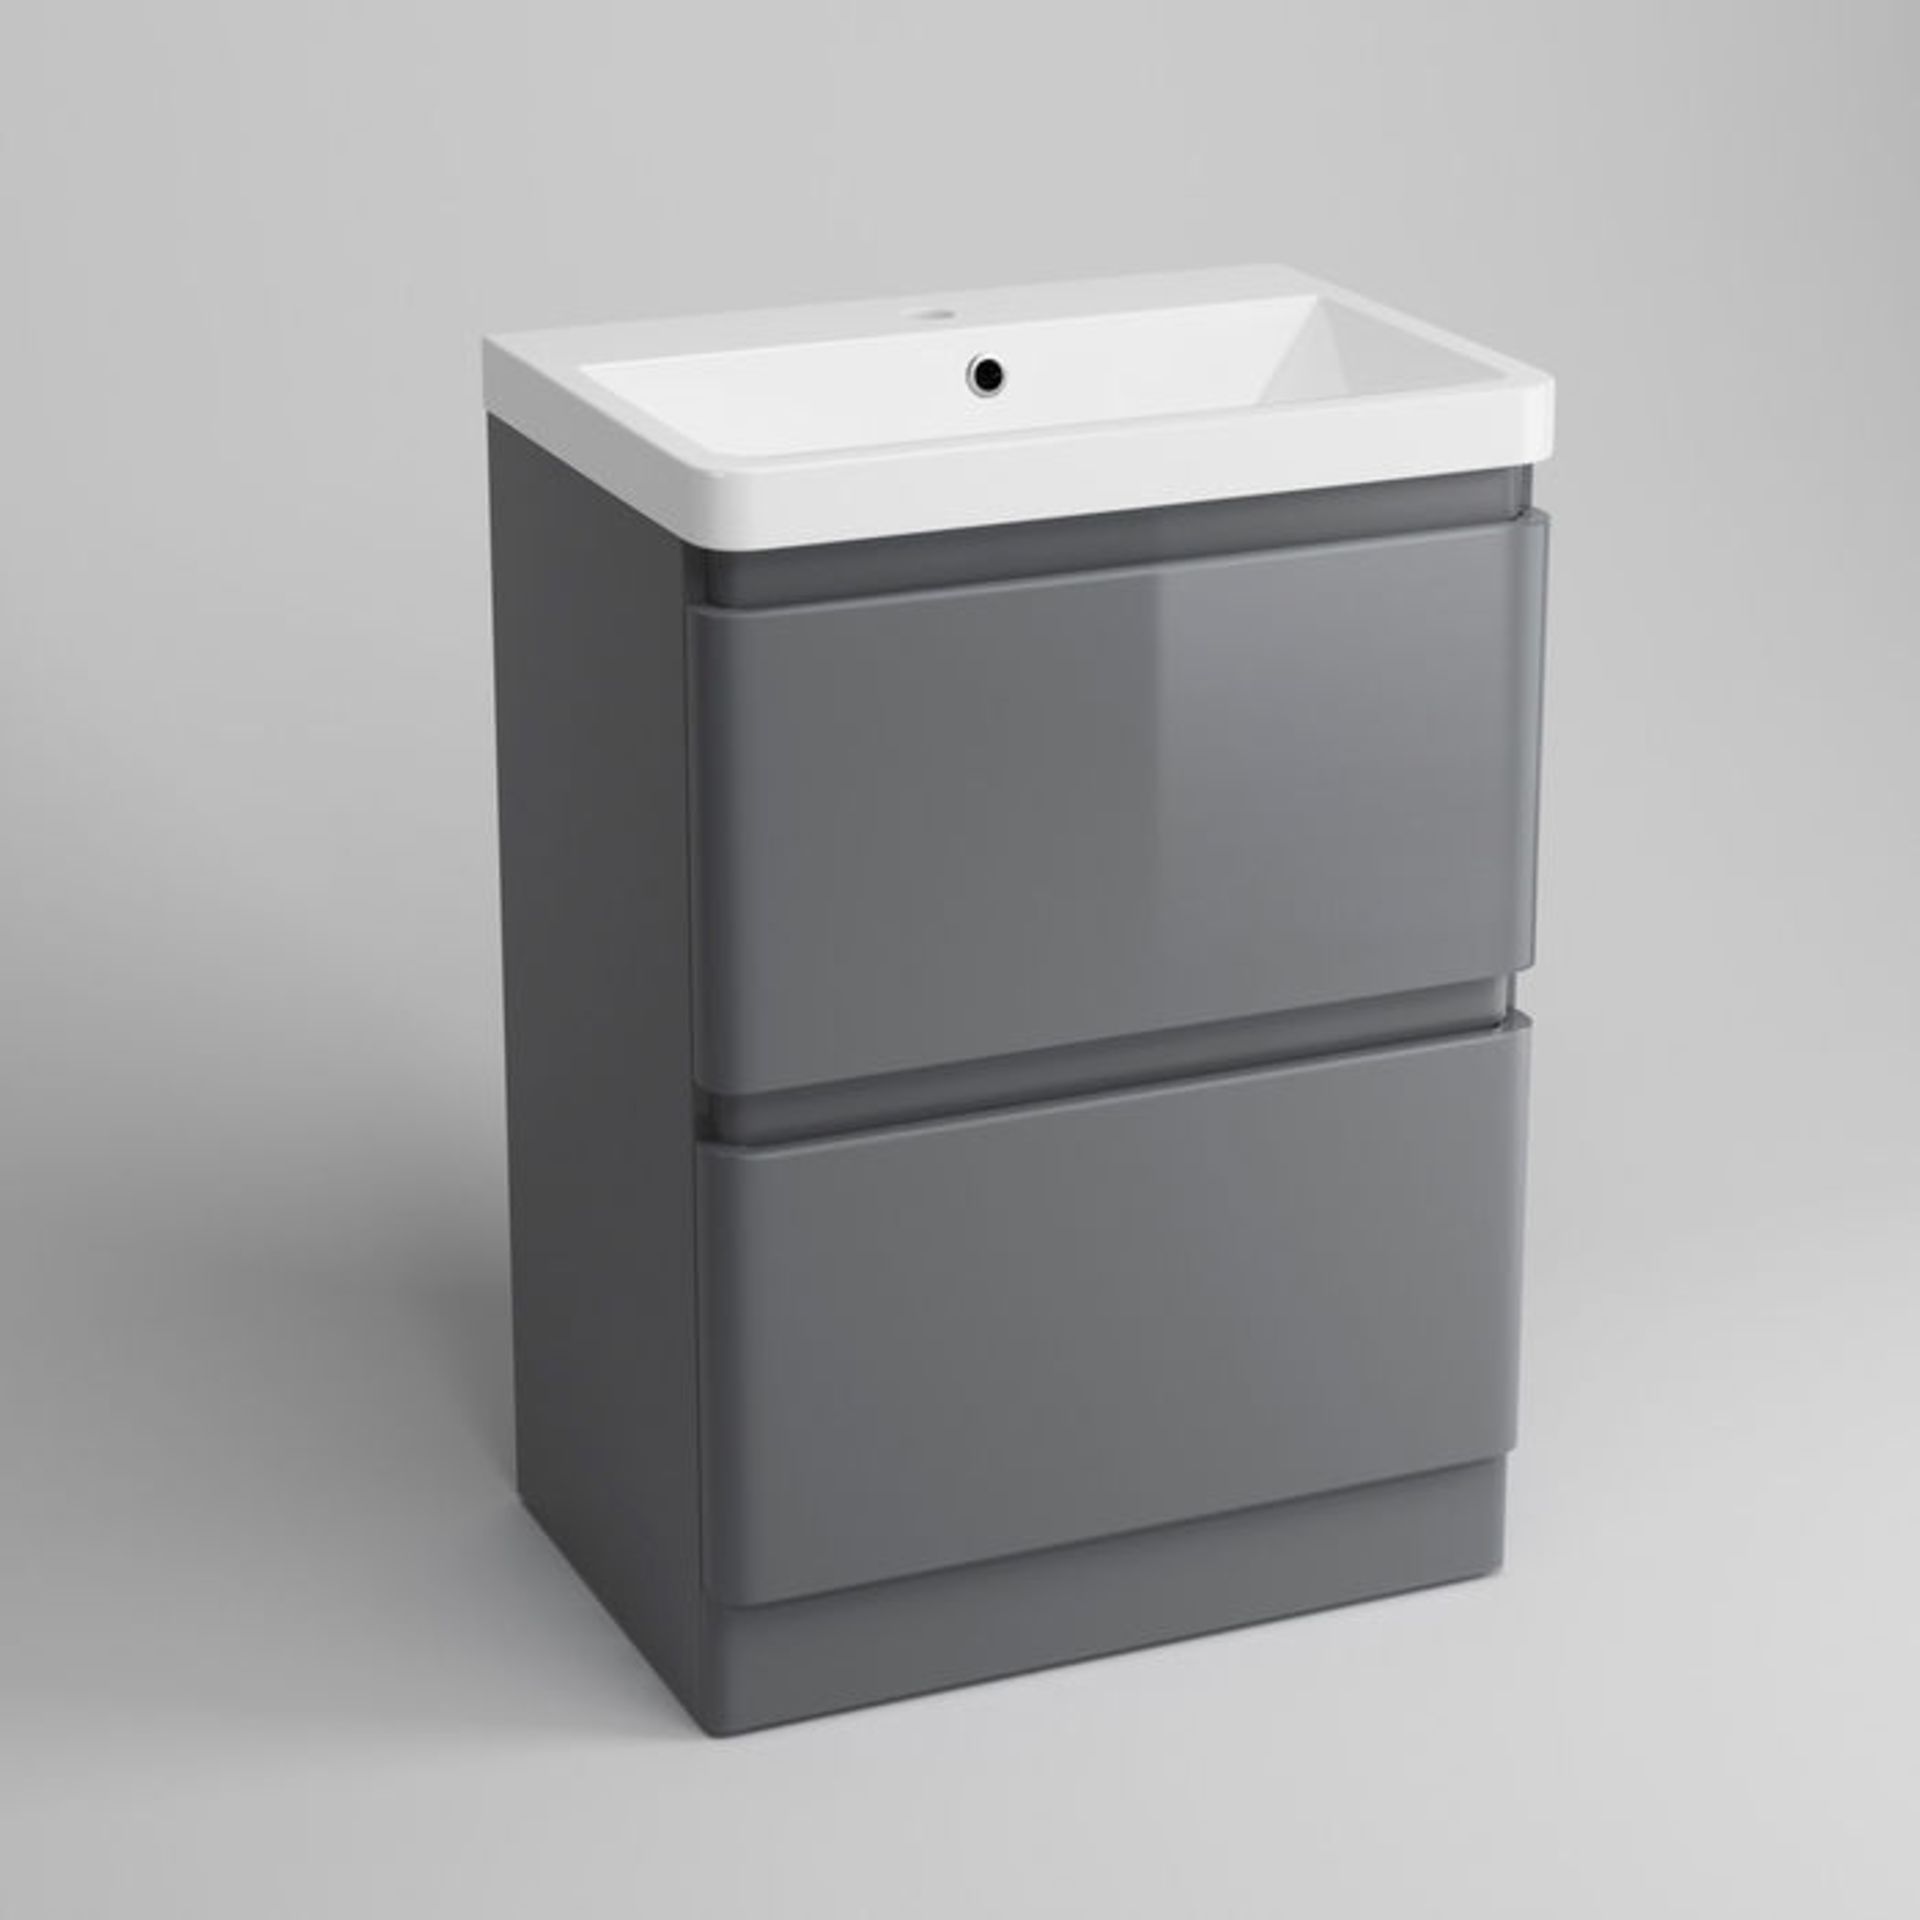 (KL301) 600mm Denver Gloss Grey Drawer Unit - Floor Standing. . Does NOT include basin. We love this - Image 4 of 5